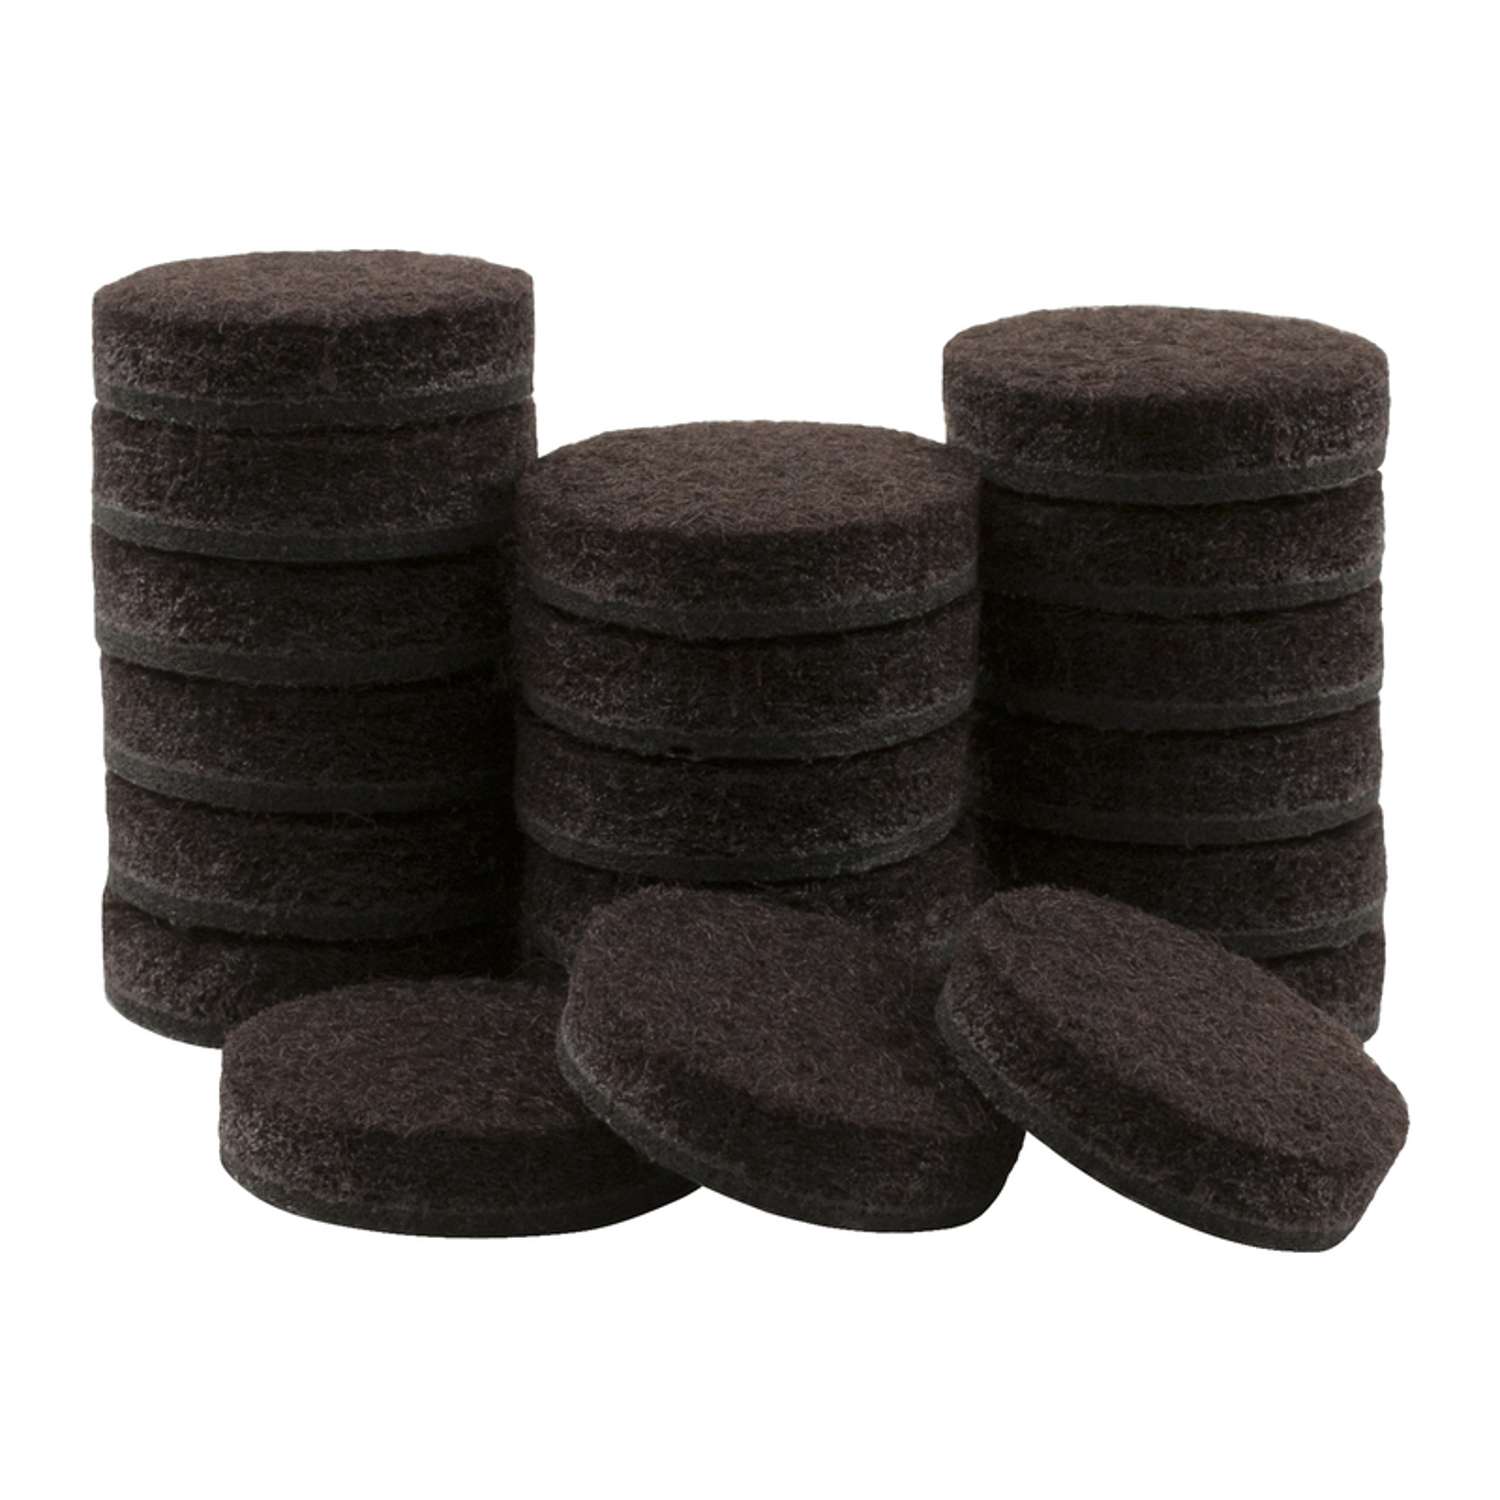 SoftTouch 1 inch Round Heavy-Duty Felt Furniture Pads, Black (48 Pack)